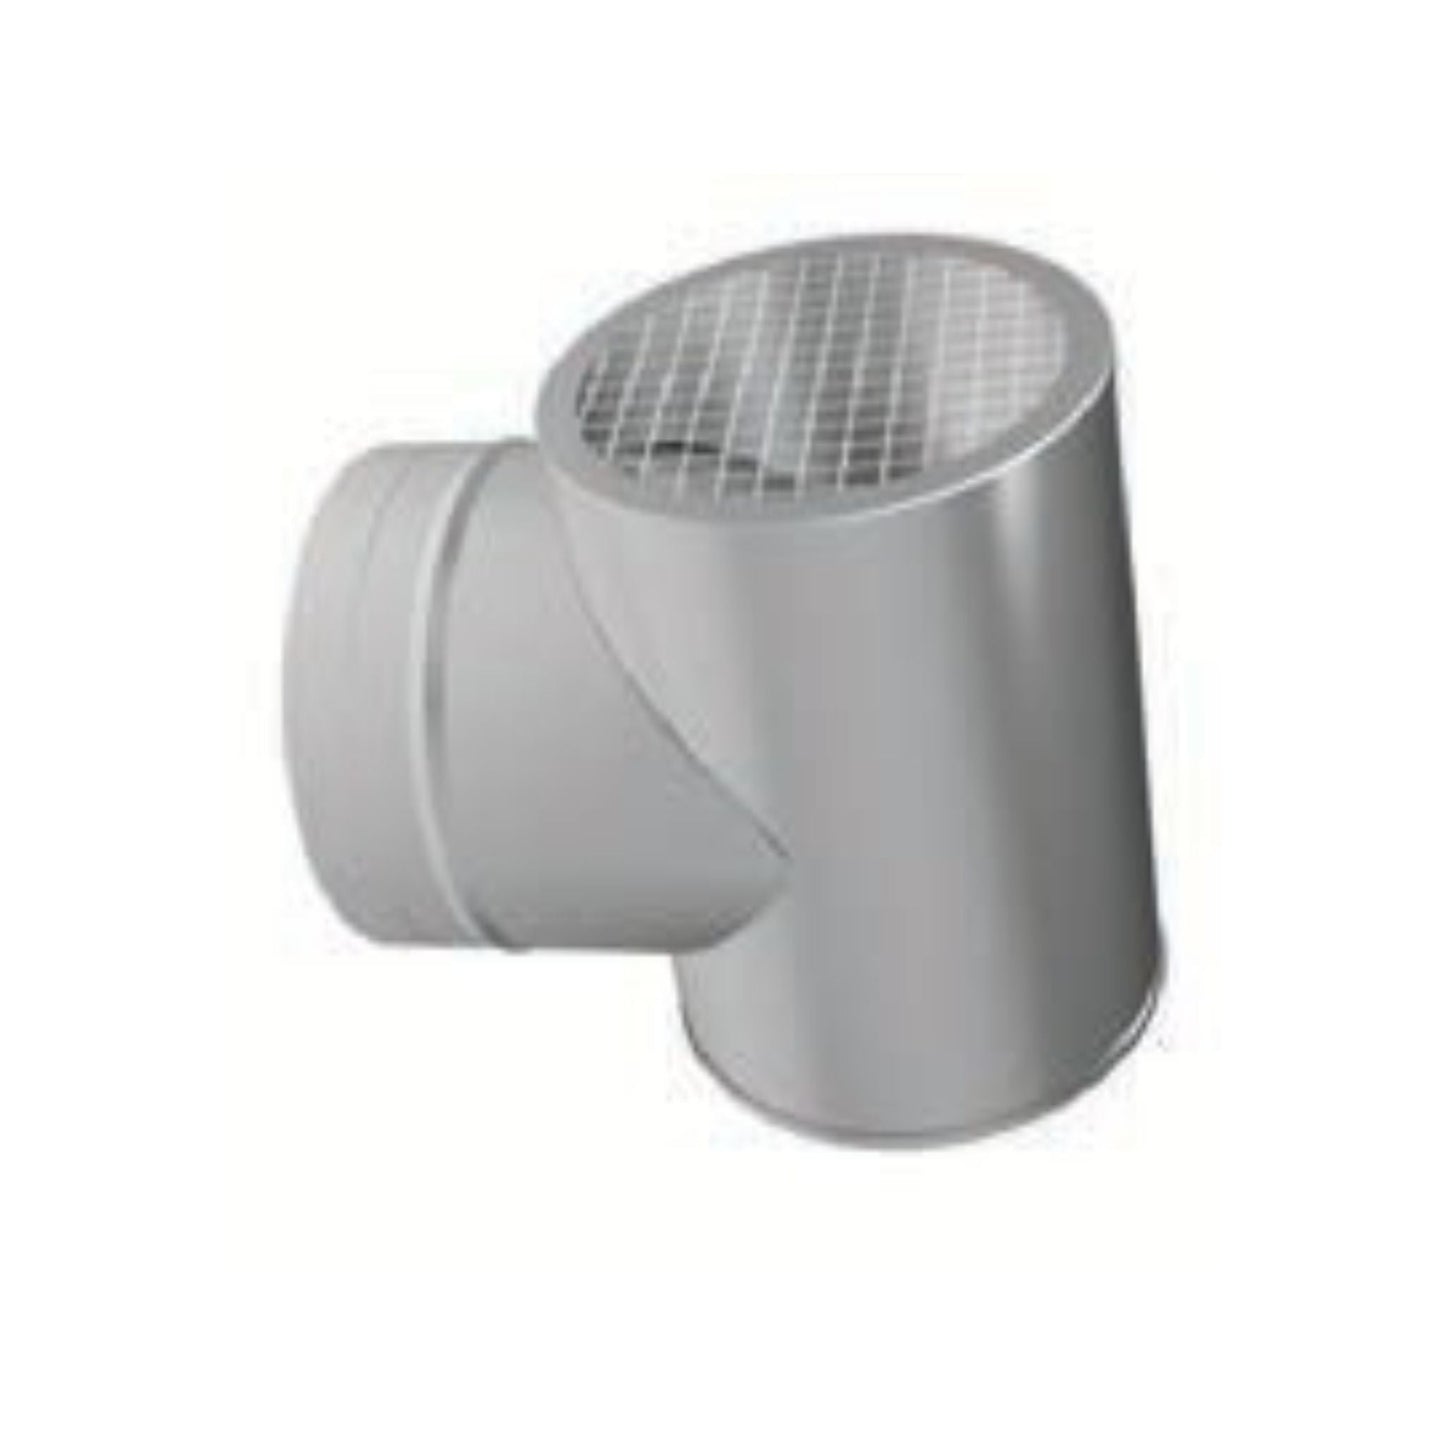 DuraVent FasNSeal 4" 29-4C Stainless Steel Termination Tee